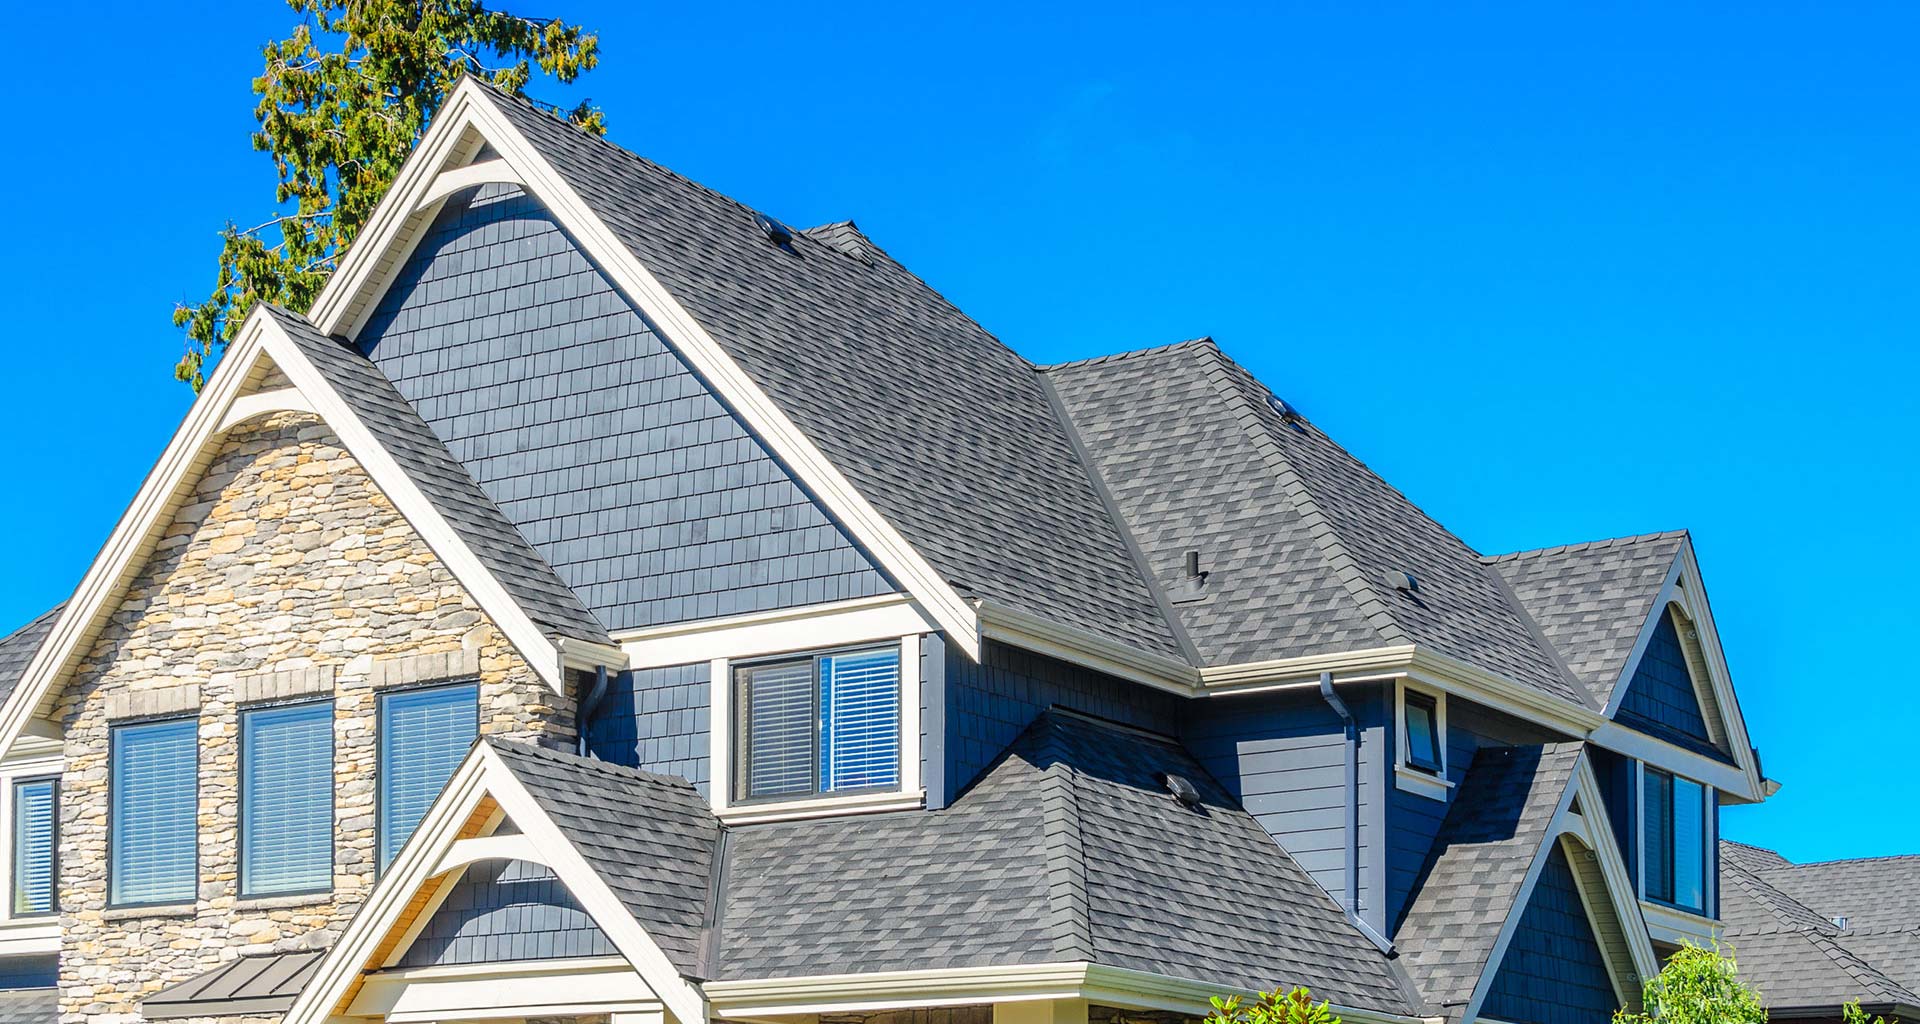 Roof Shingles Calculator – Calculating The Shingles For A New Roof